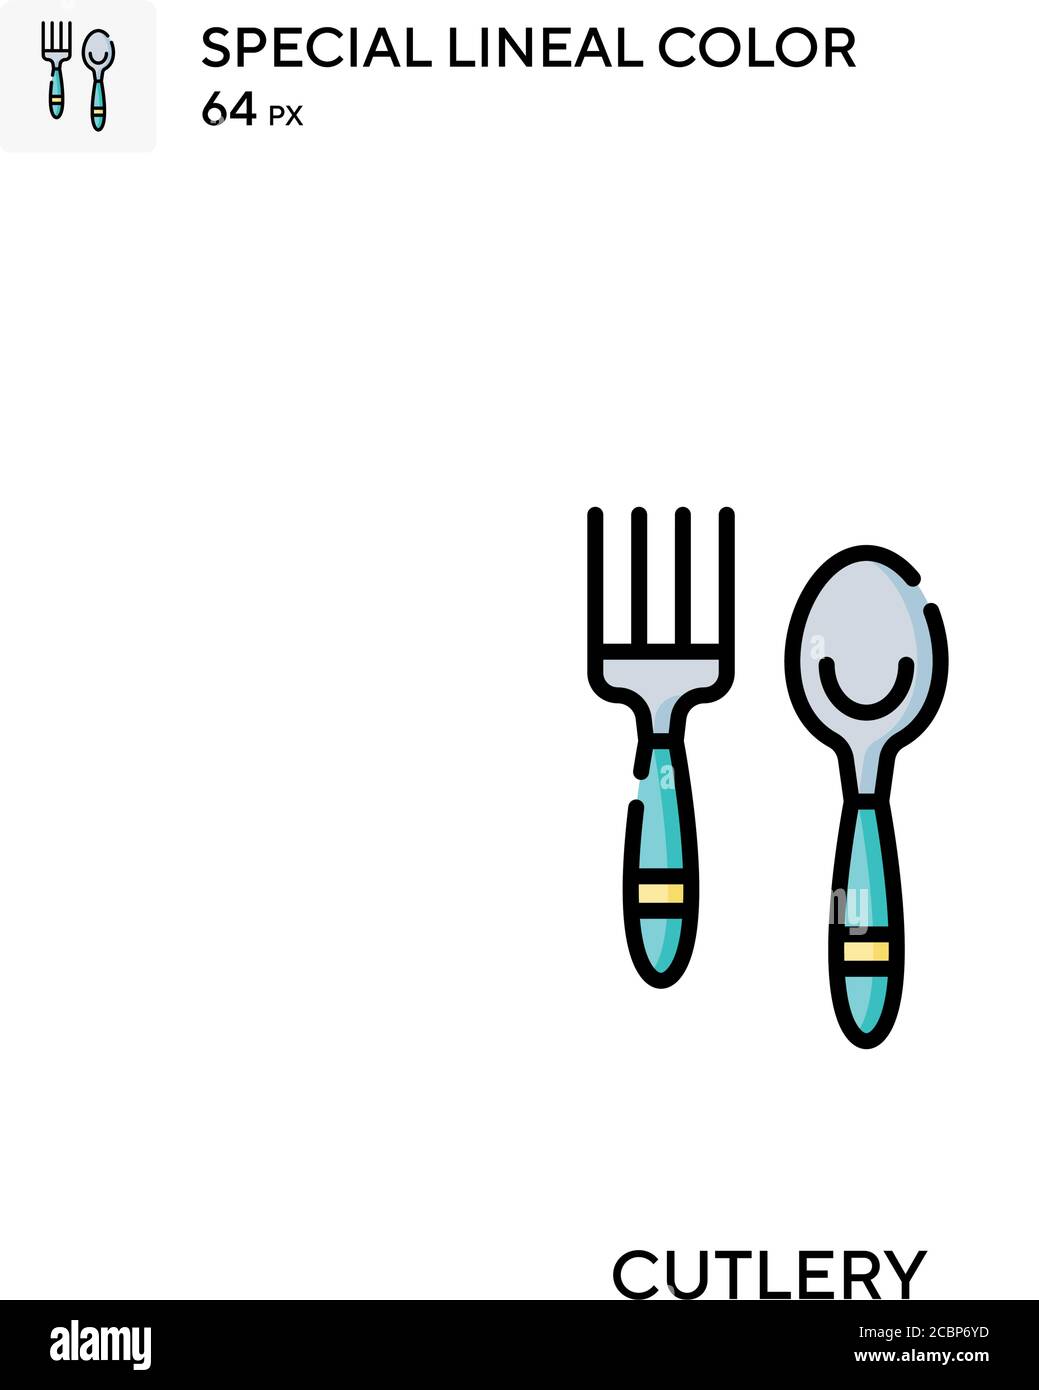 Cutlery Special lineal color vector icon. Cutlery icons for your business project Stock Vector